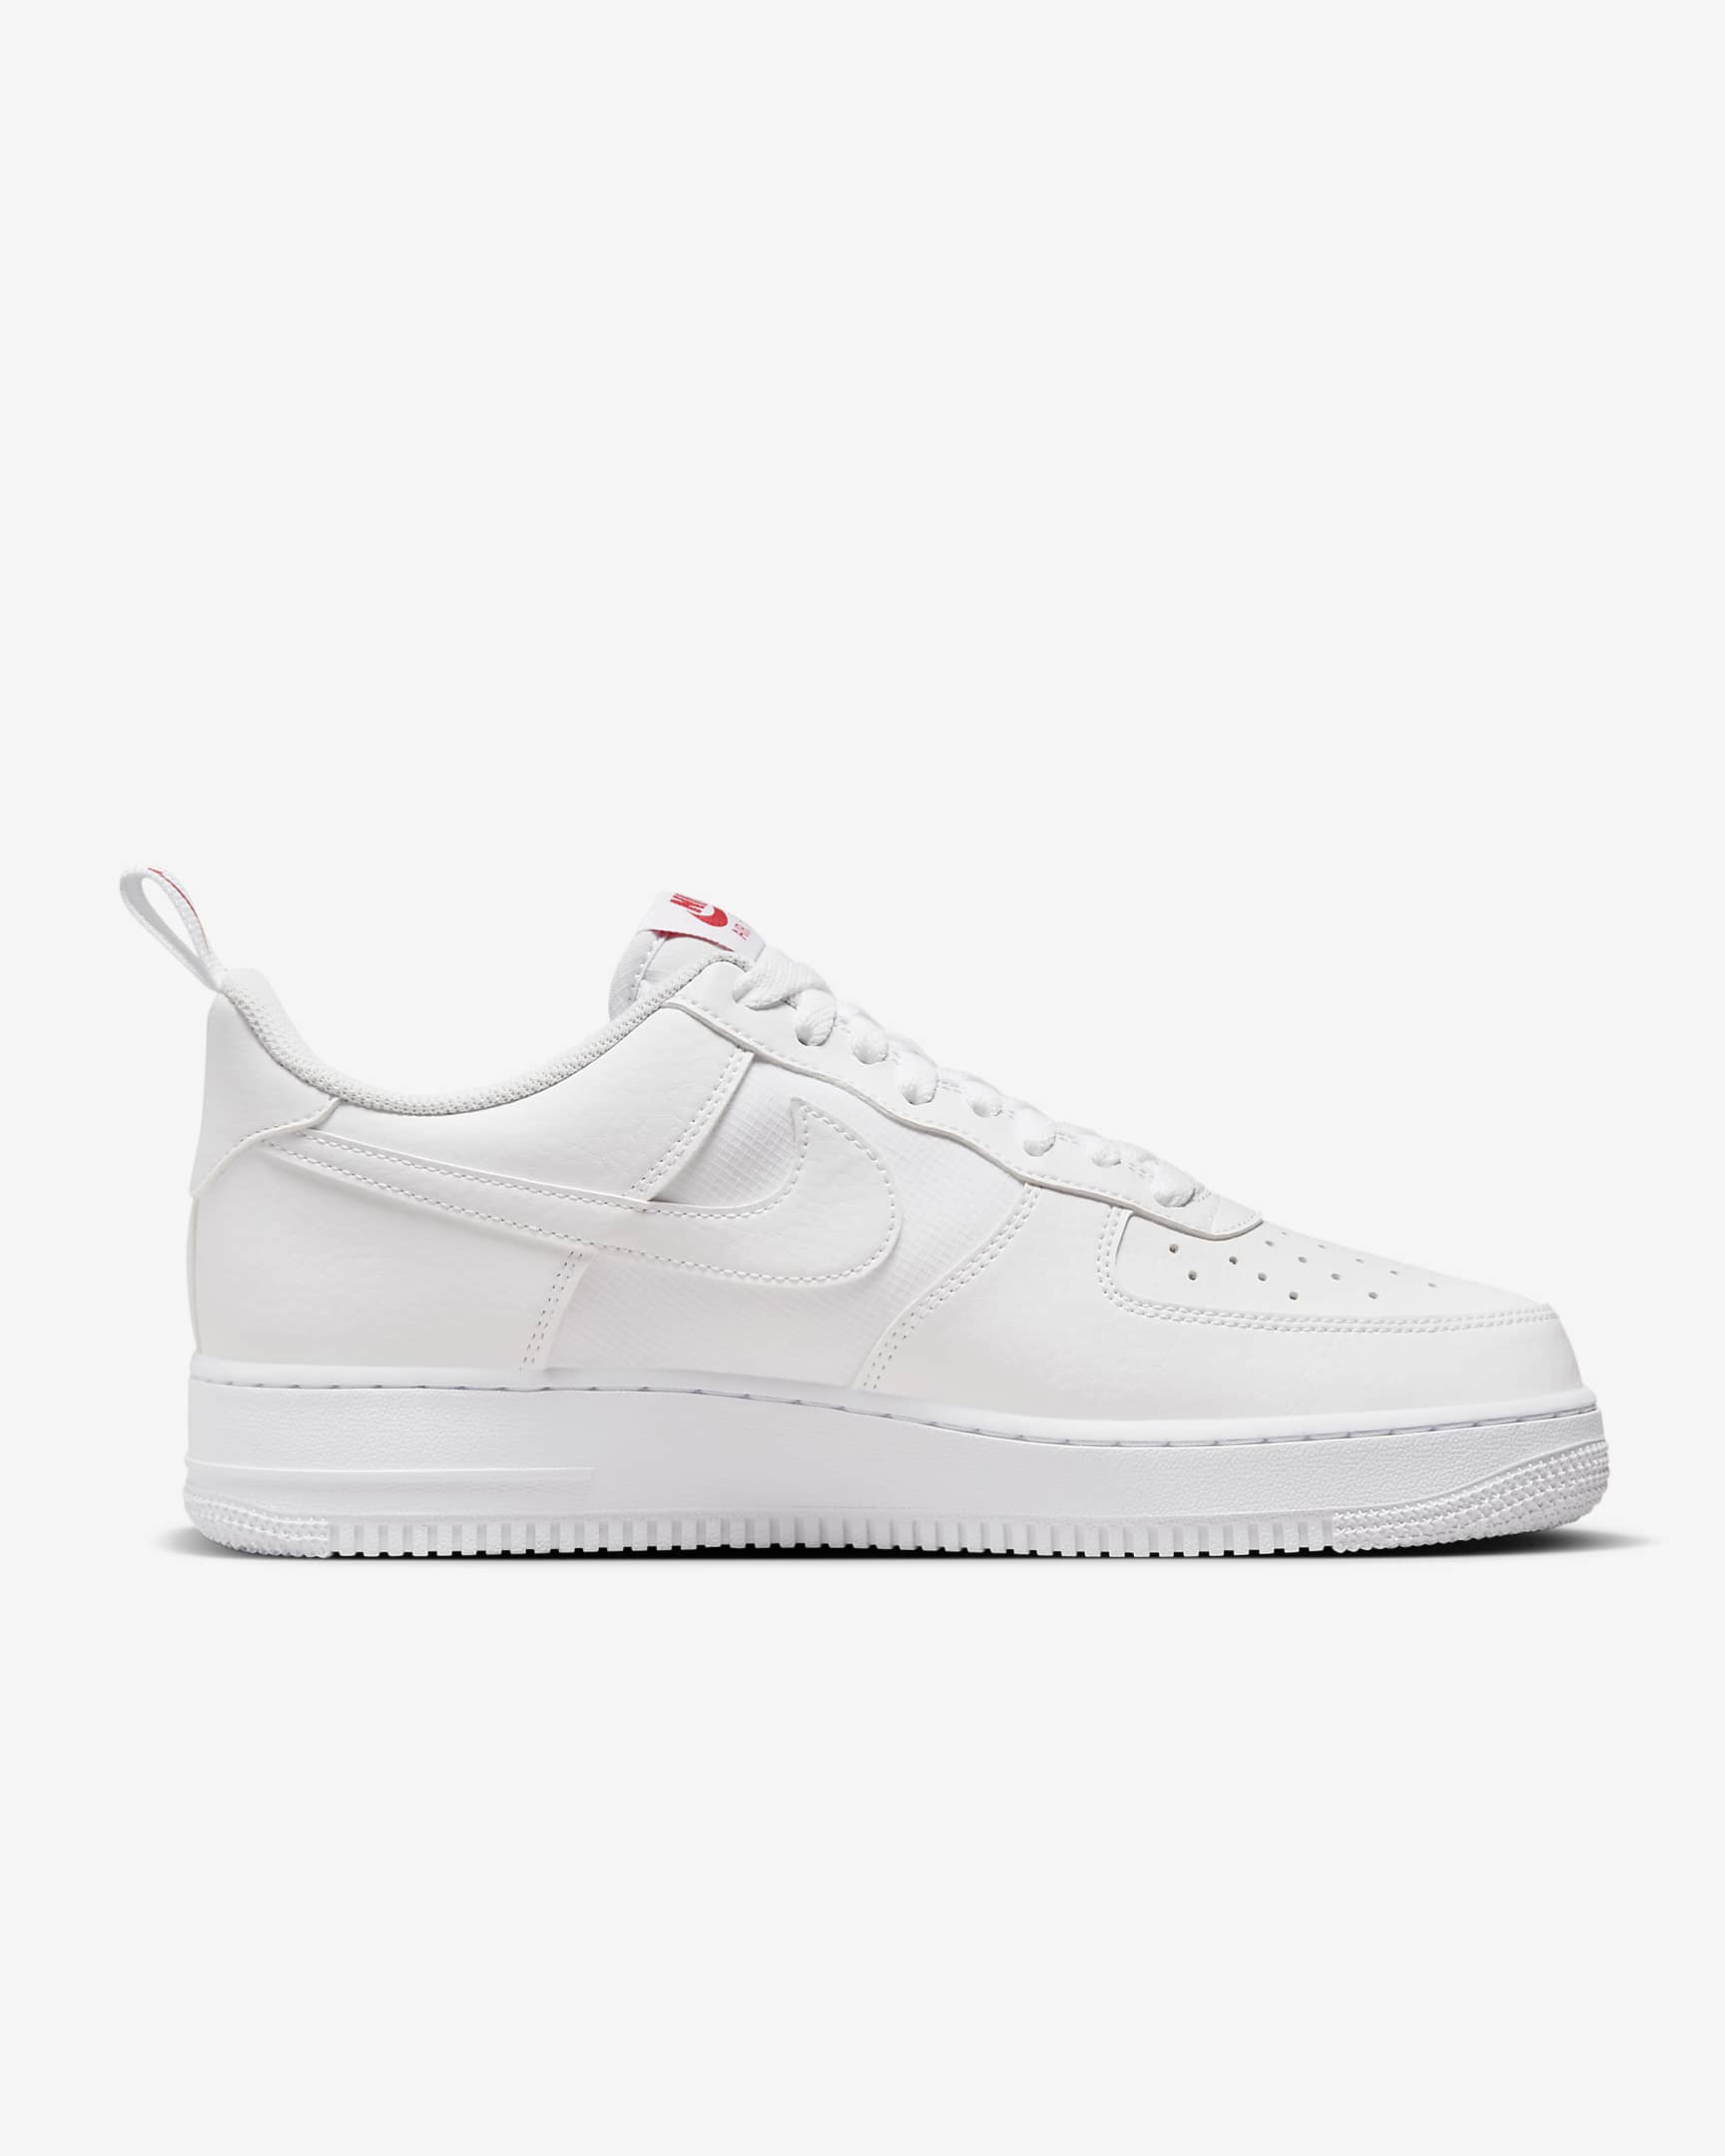 Nike Air Force 1 '07 Men's Shoes - White/University Red/White